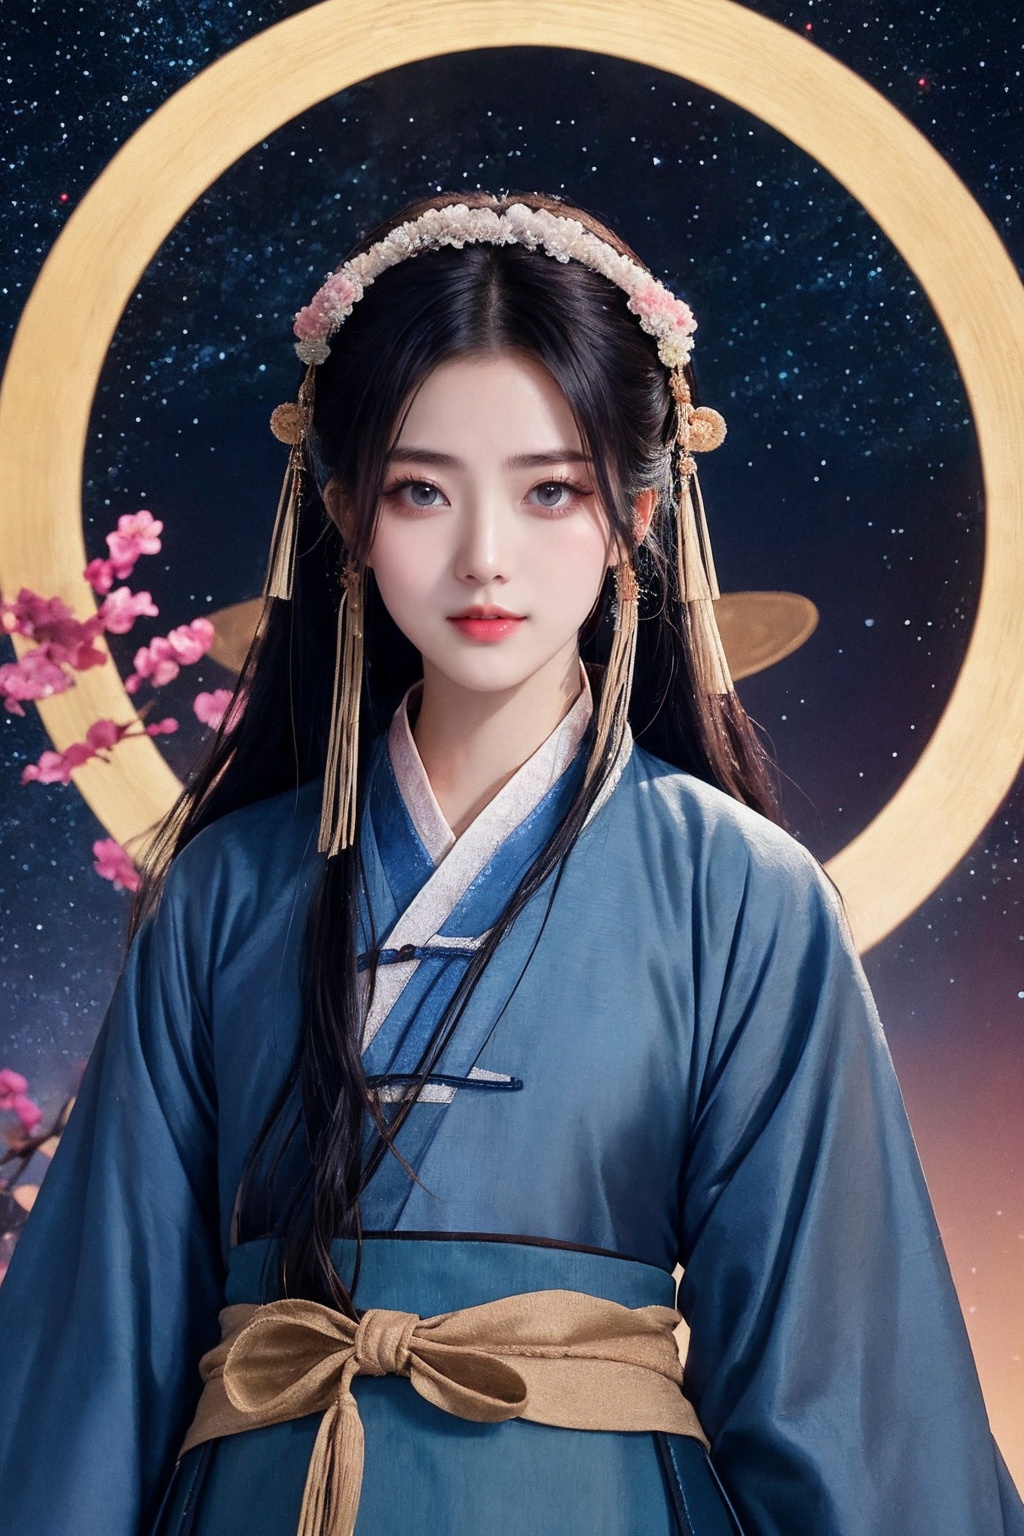 Starry sky,Milky Way,hanfu,a woman dressed in a traditional chinese hanfu,Dark( blue Hanfu:1.6),embroidered with many patterns,Dark blue hanfu,set against a cosmic backdrop,the woman has a serene expression,her hair is styled in an intricate updo,and she wears a delicate headpiece,the hanfu is a flowing garment with a gradient of colors,transitioning from a light blue at the bottom to a deeper shade at the top,the environment is filled with stars and nebulae,giving the image a dreamy and ethereal quality,at night,the background is a starry sky,realistic,ultra-fine painting,sharp focus,extreme detail description,